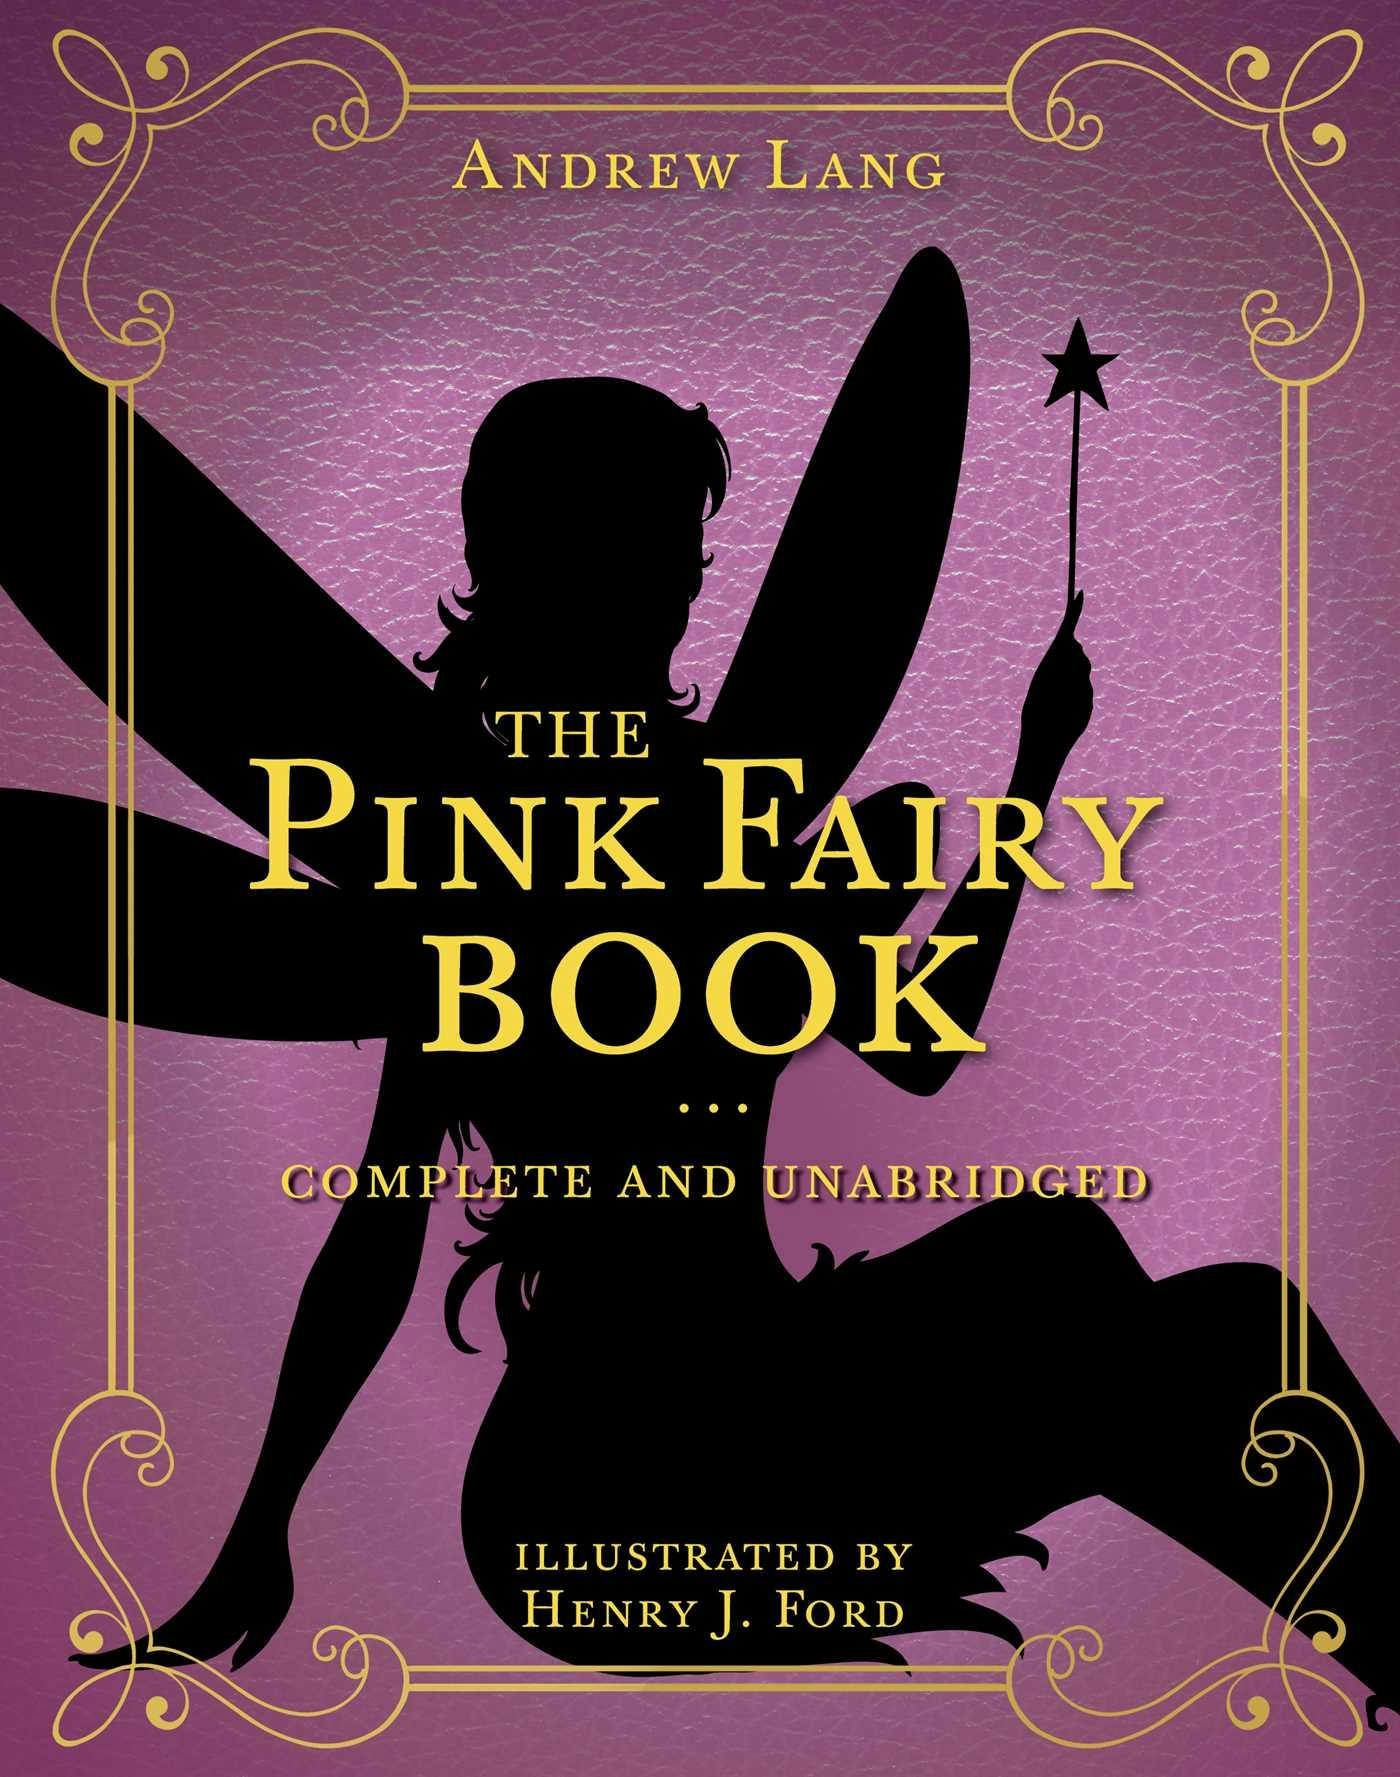 The Pink Fairy Book: Complete and Unabridged - Andrew Lang